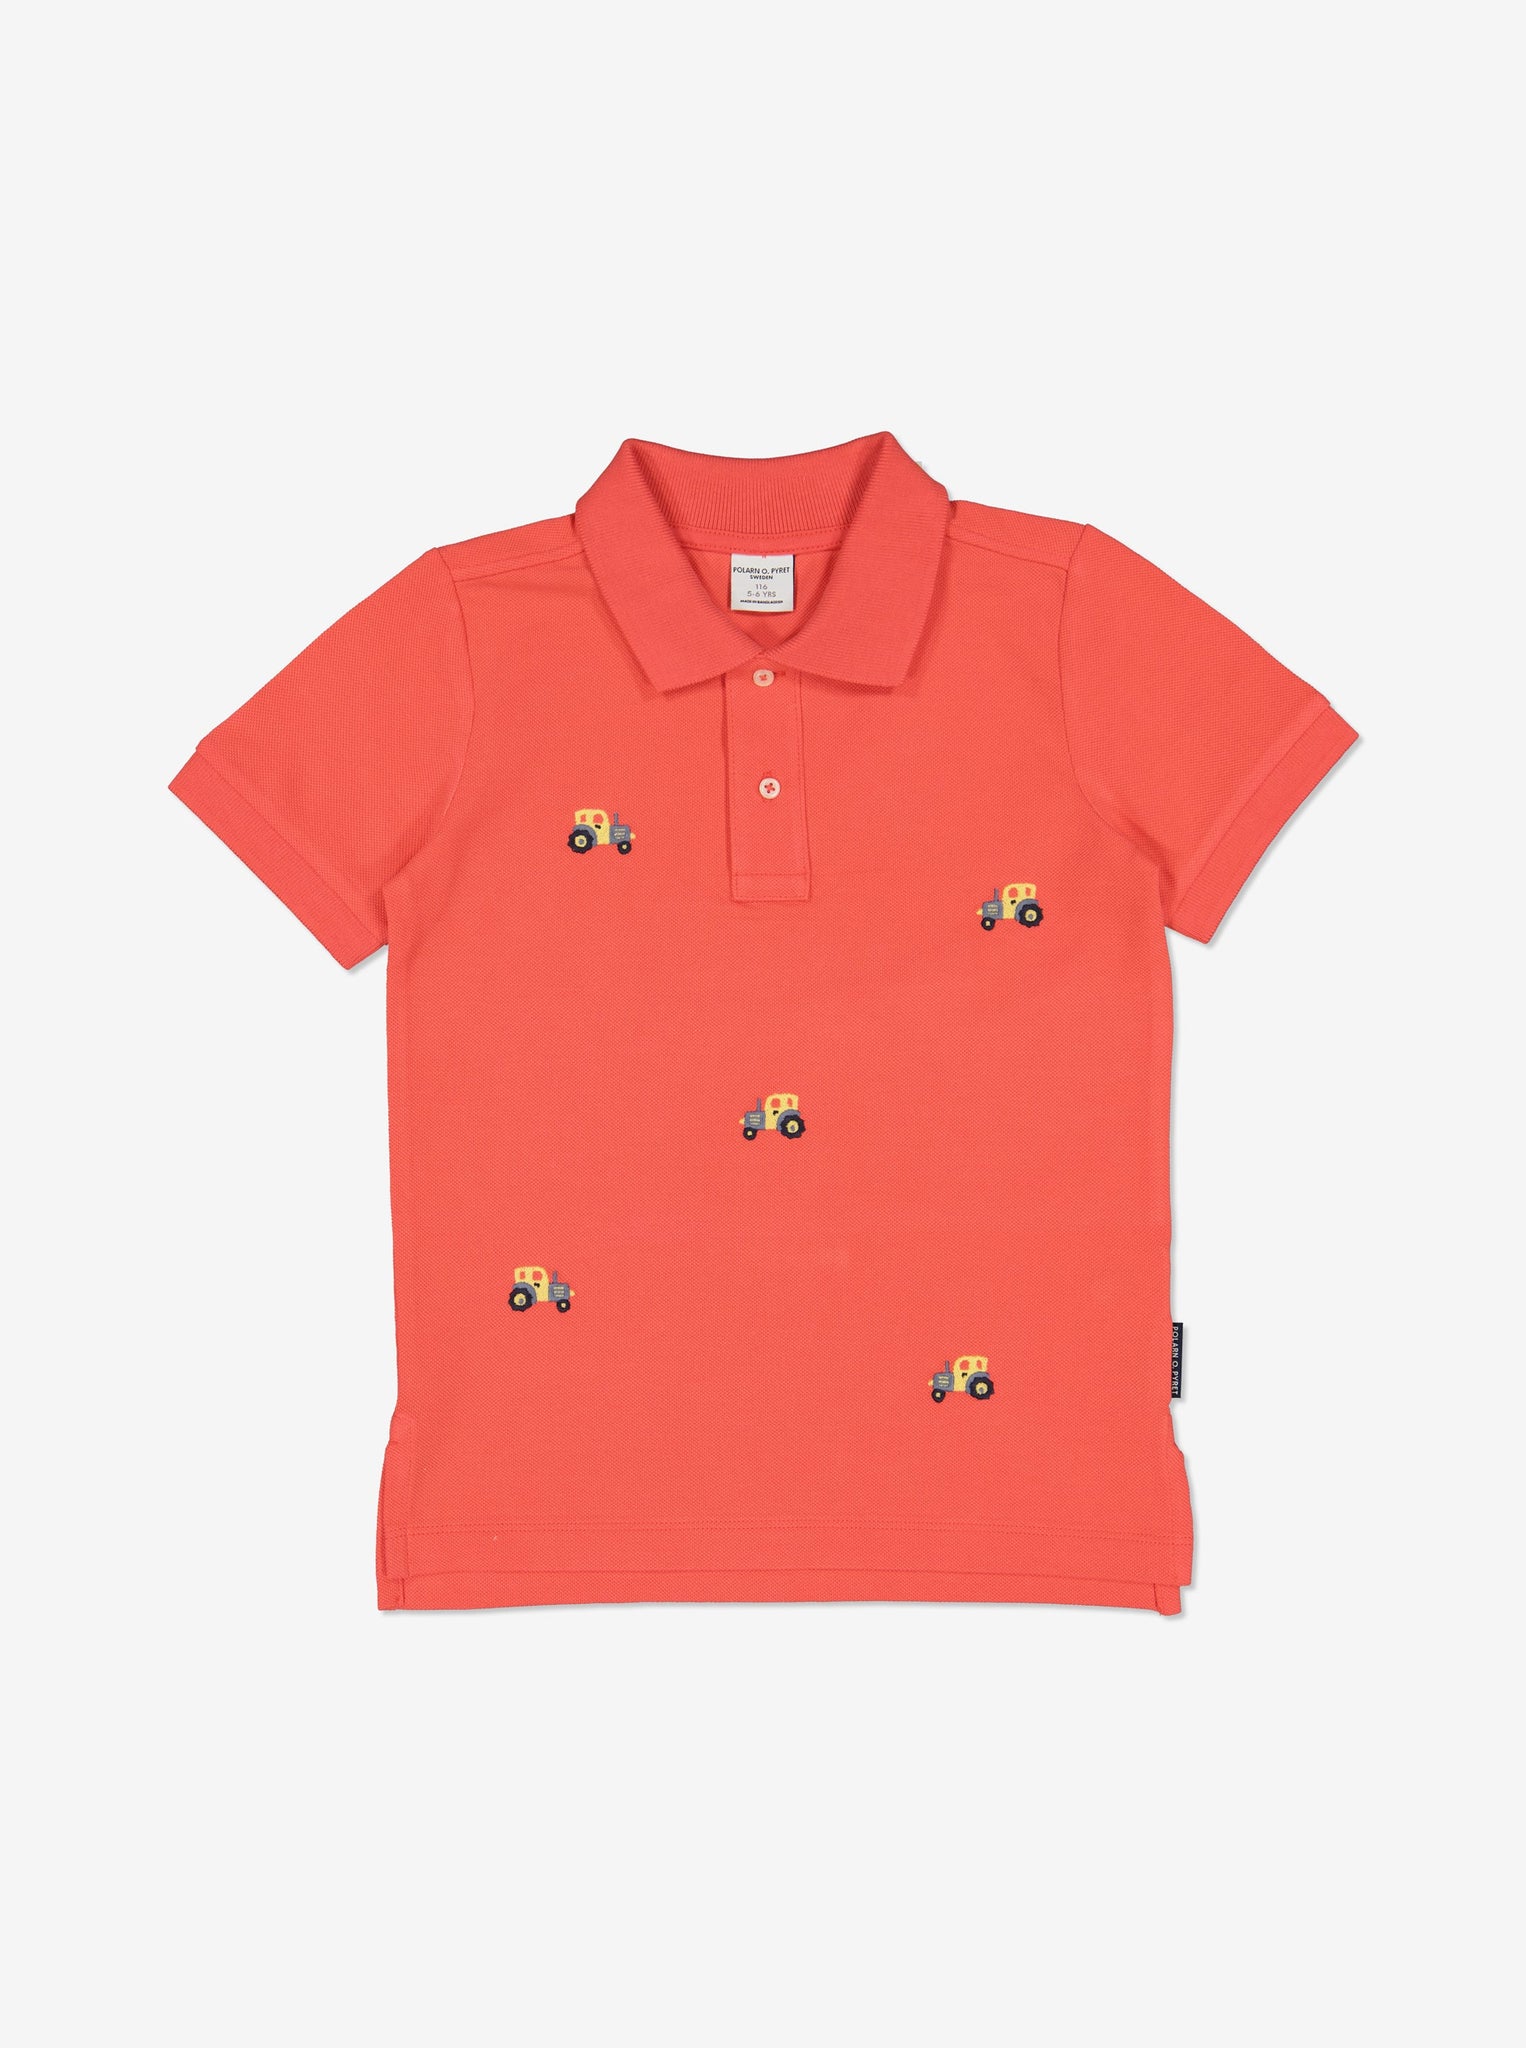 Kids Tractor Polo Shirt from Polarn O. Pyret Kidswear. Made from 100% GOTS Organic Cotton.